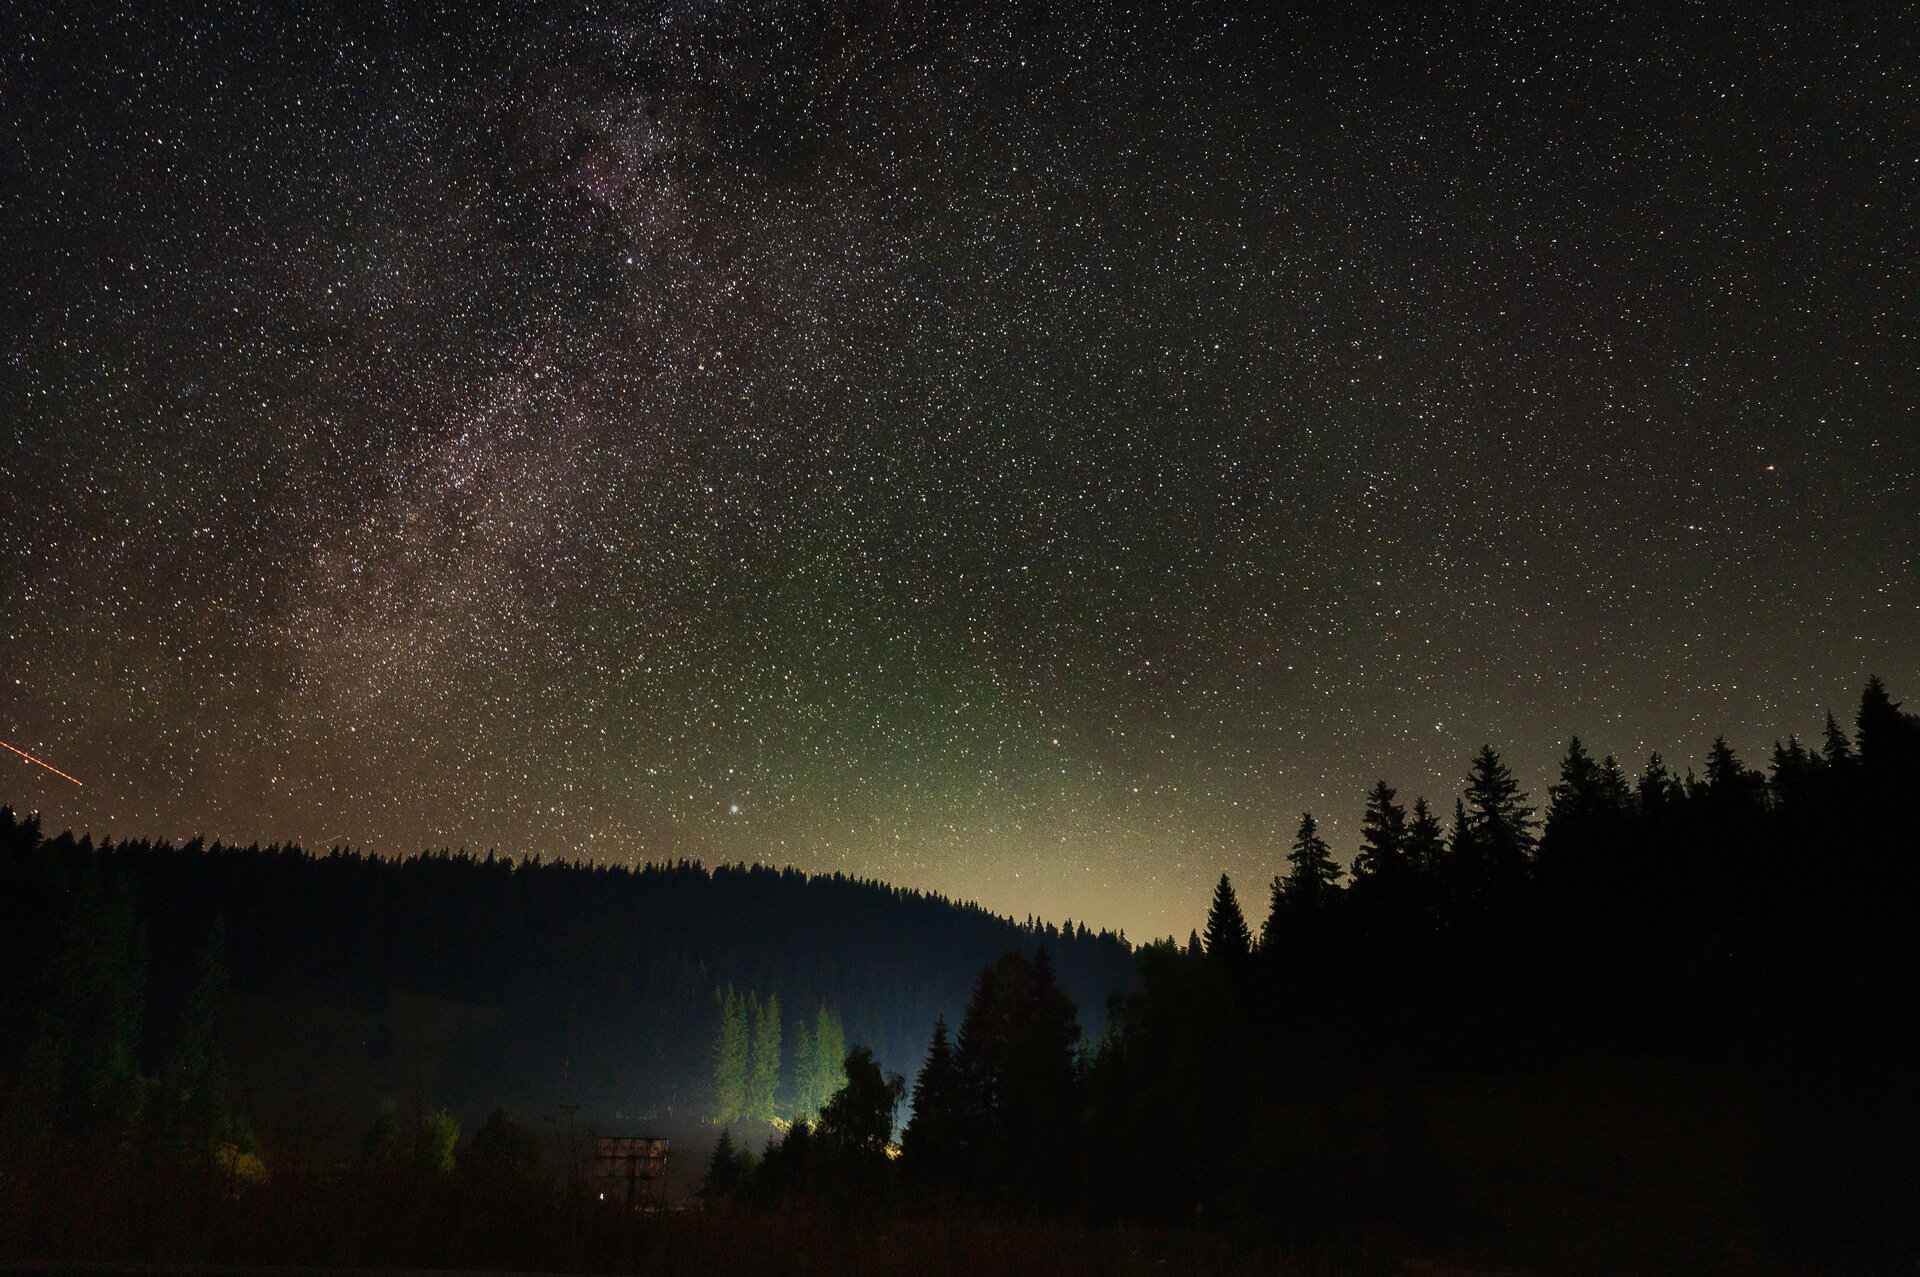 Photo in Astrophotography | Author Dimitar Shepelev - DimitarShe | PHOTO FORUM